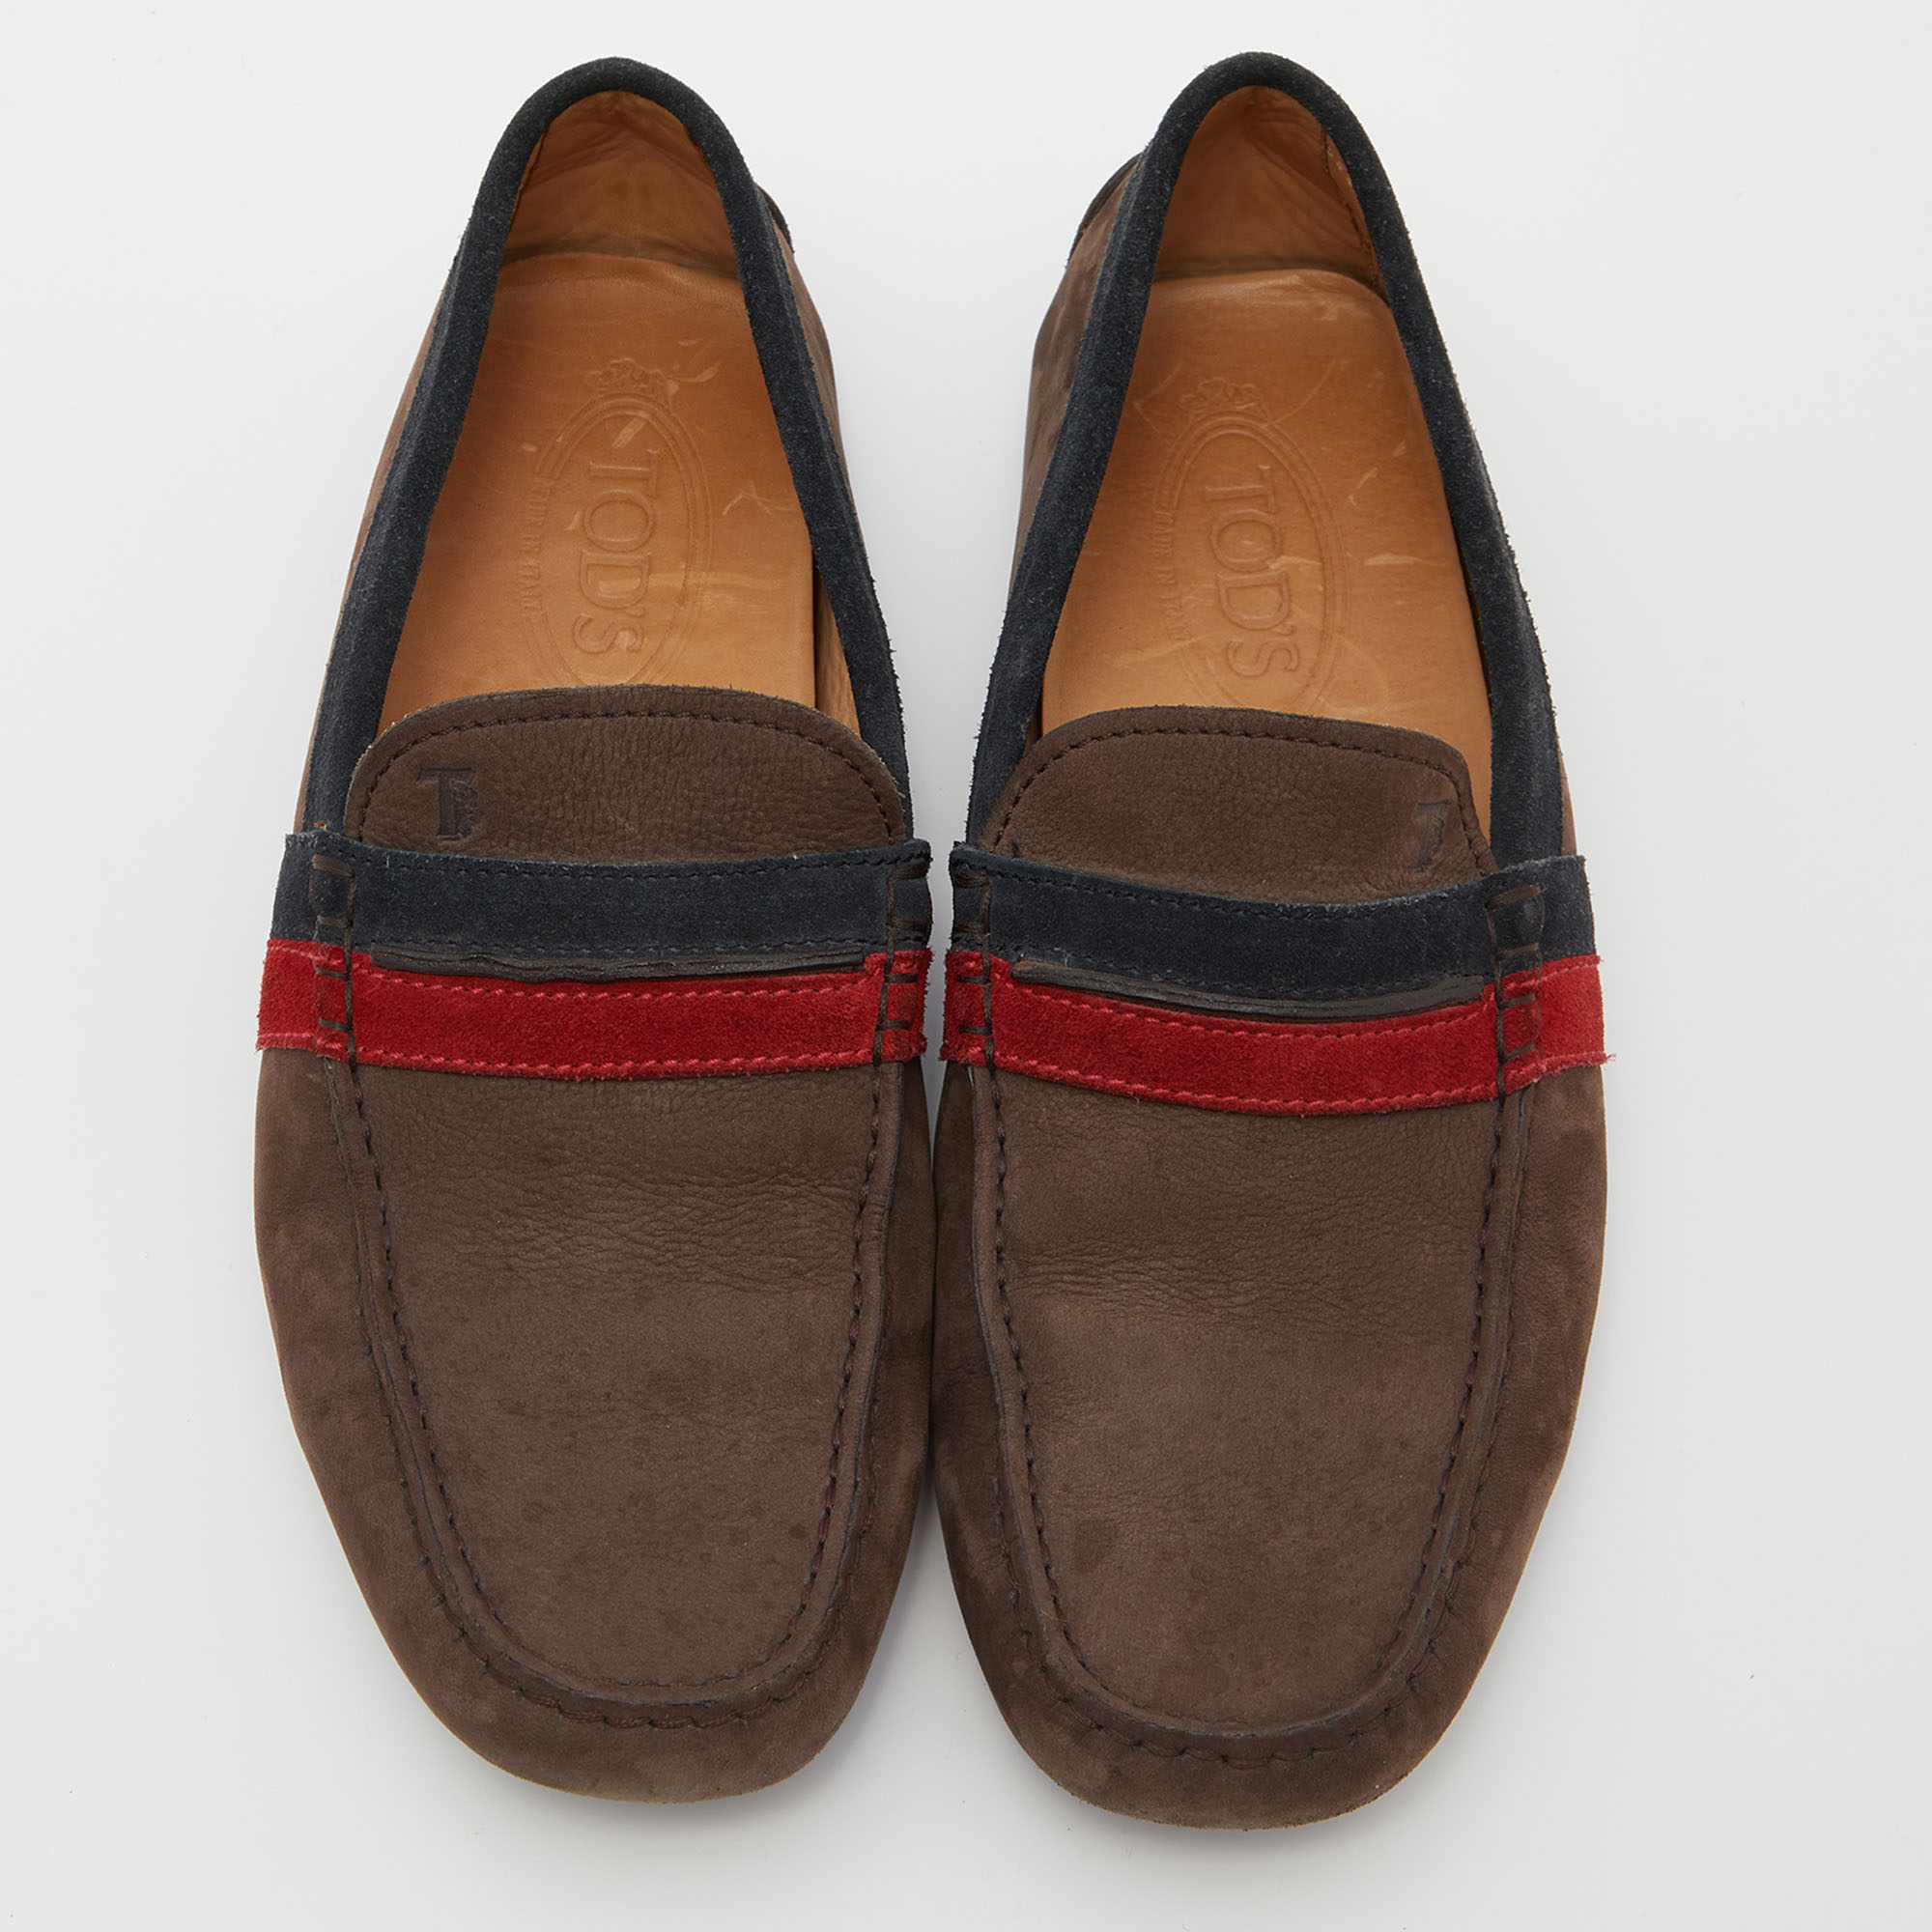 Tod's Brown Suede Slip On Loafers Size 41